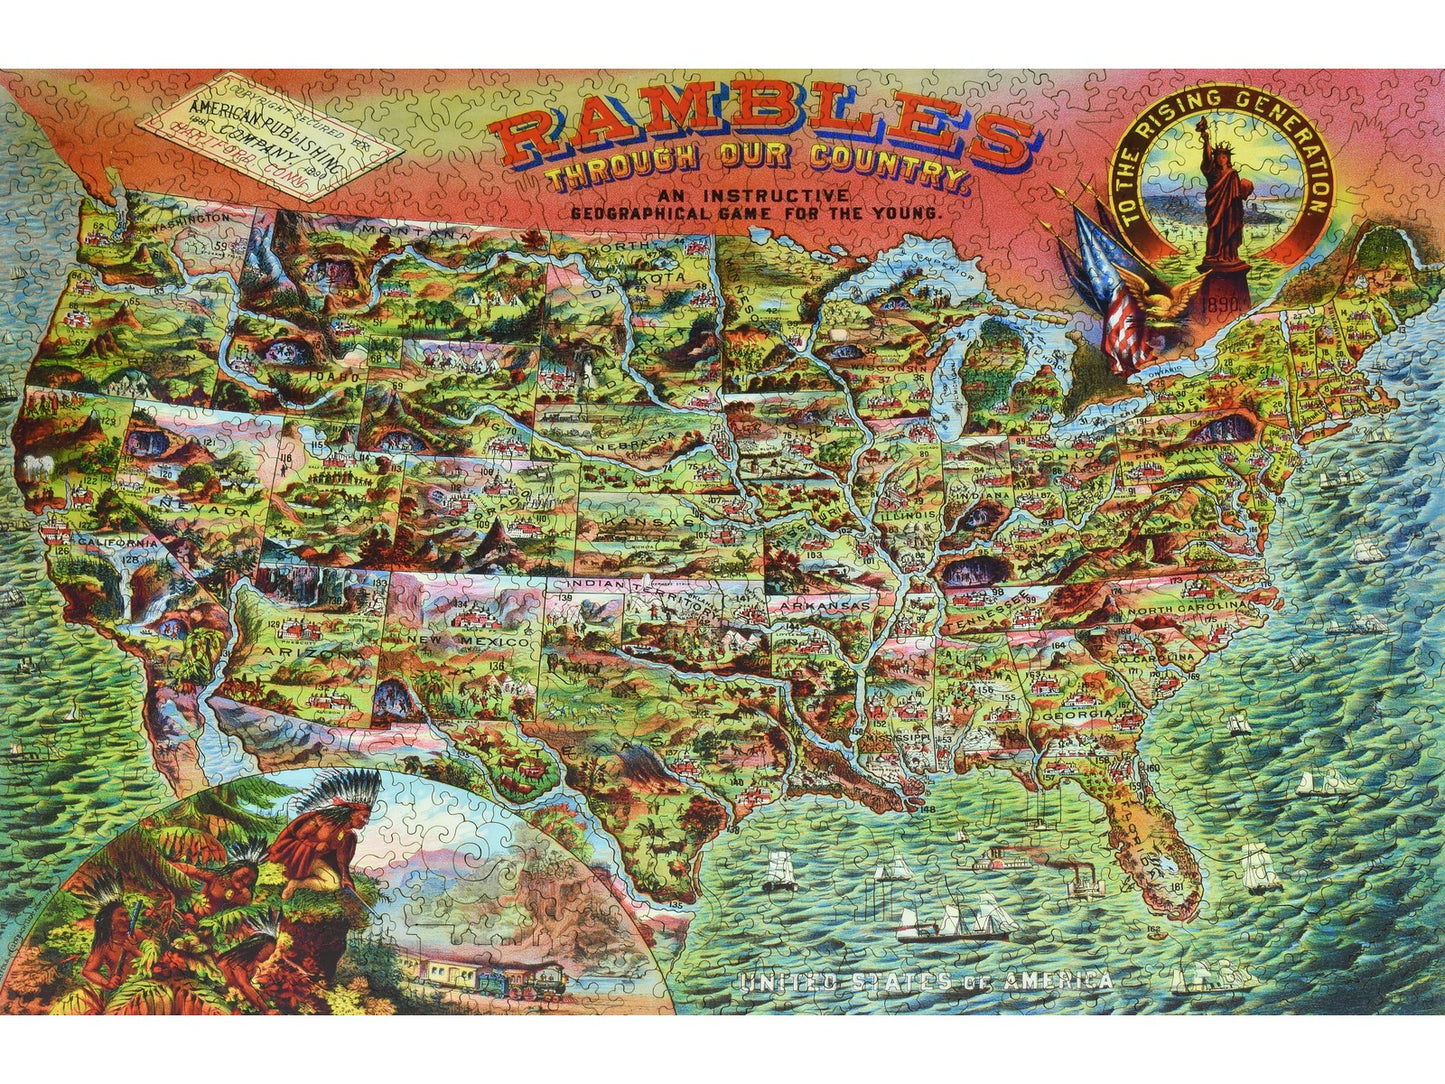 The front of the puzzle, Rambles Through Our Country, which shows an illustrated map of the United States.